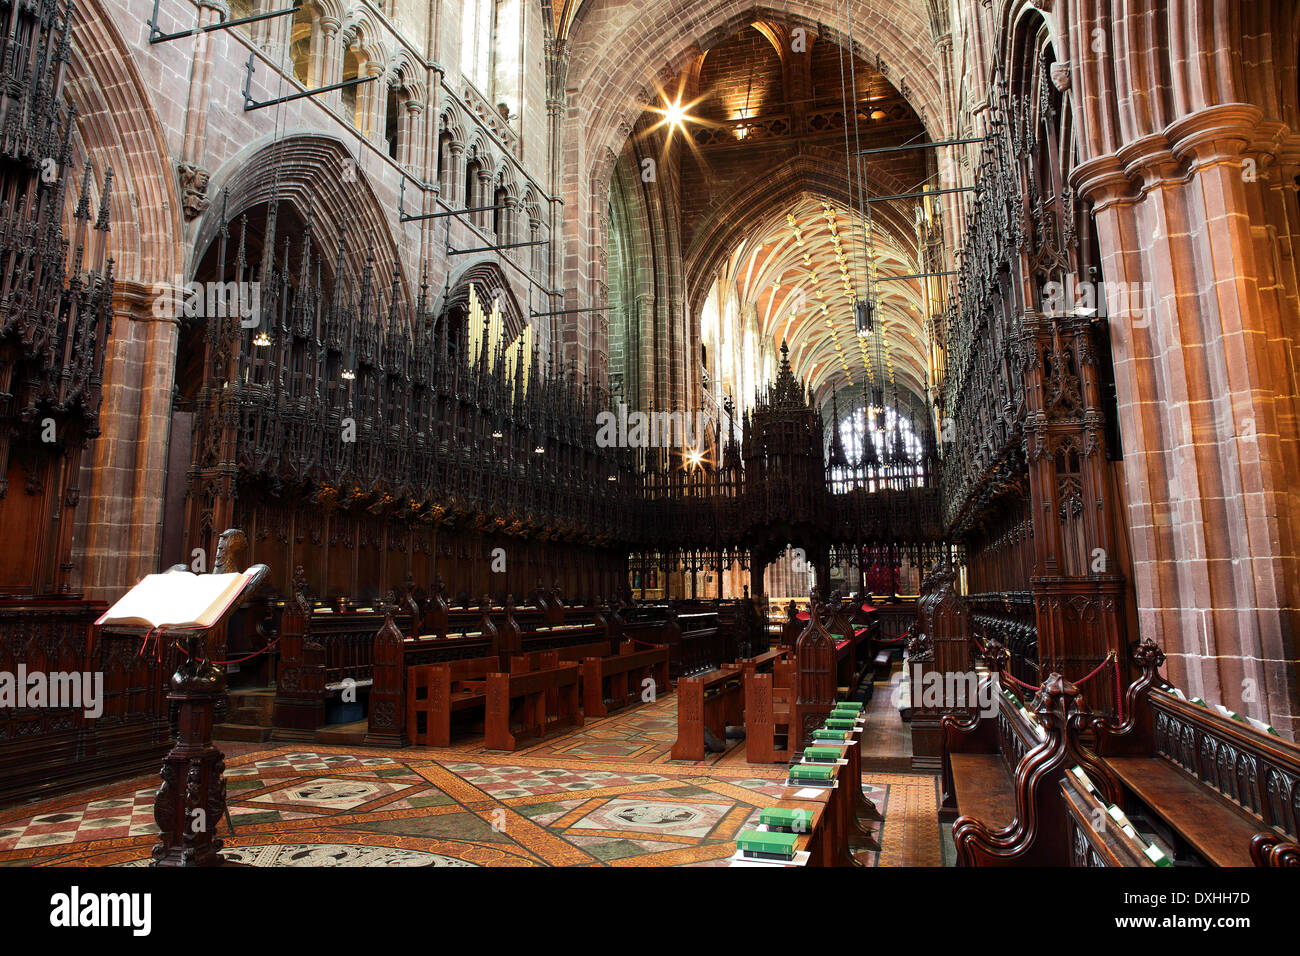 One of (25) images related to internal aspects of Chester Cathedral by photographer Peter Wheeler. Please view full set individually. Stock Photo